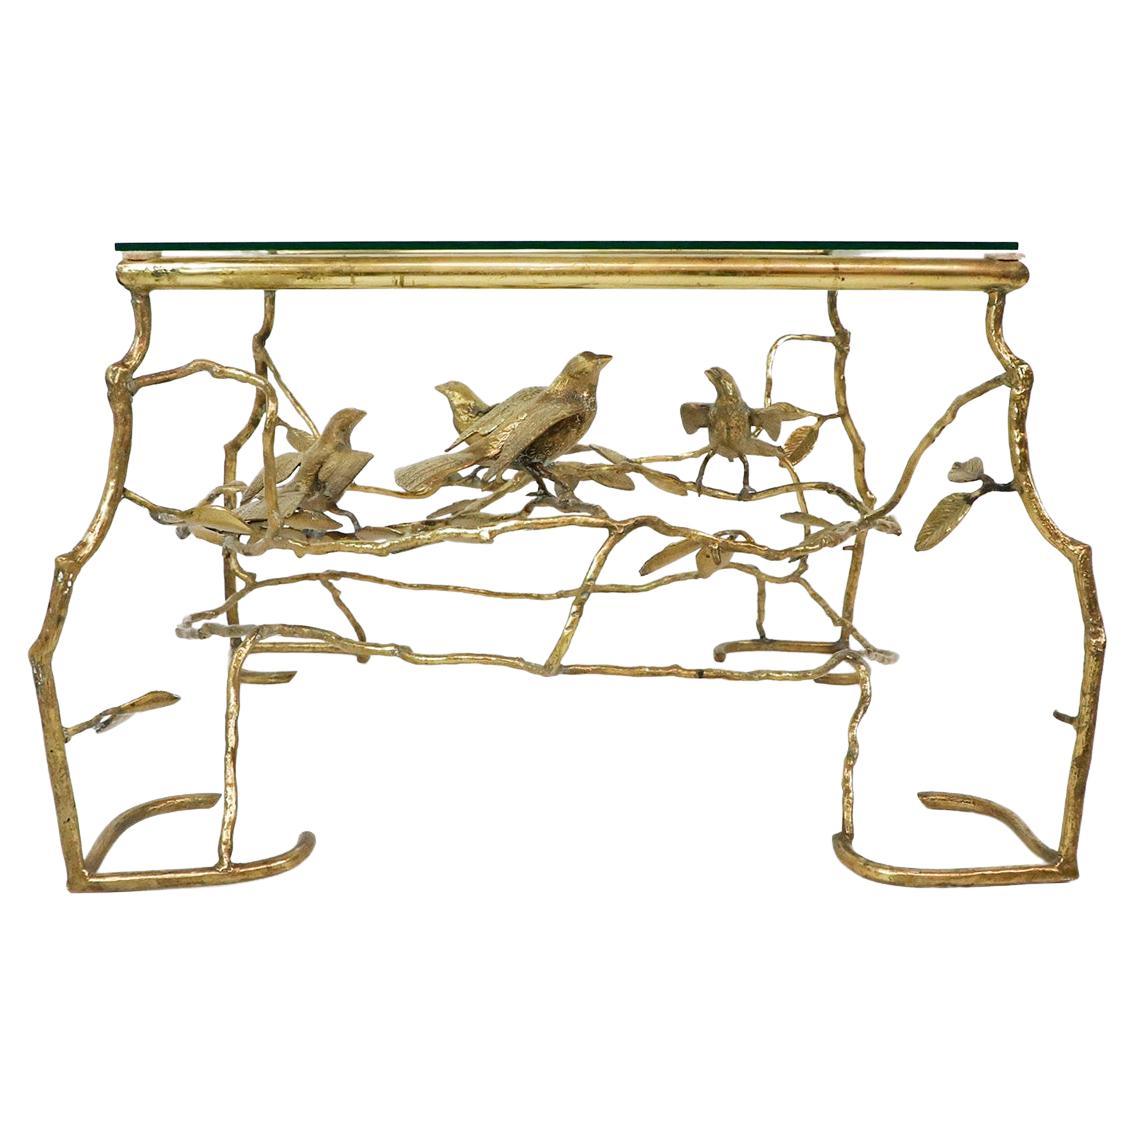 Tree Branches & Birds Table in the Style of Giacometti Made in Brass Handcrafted